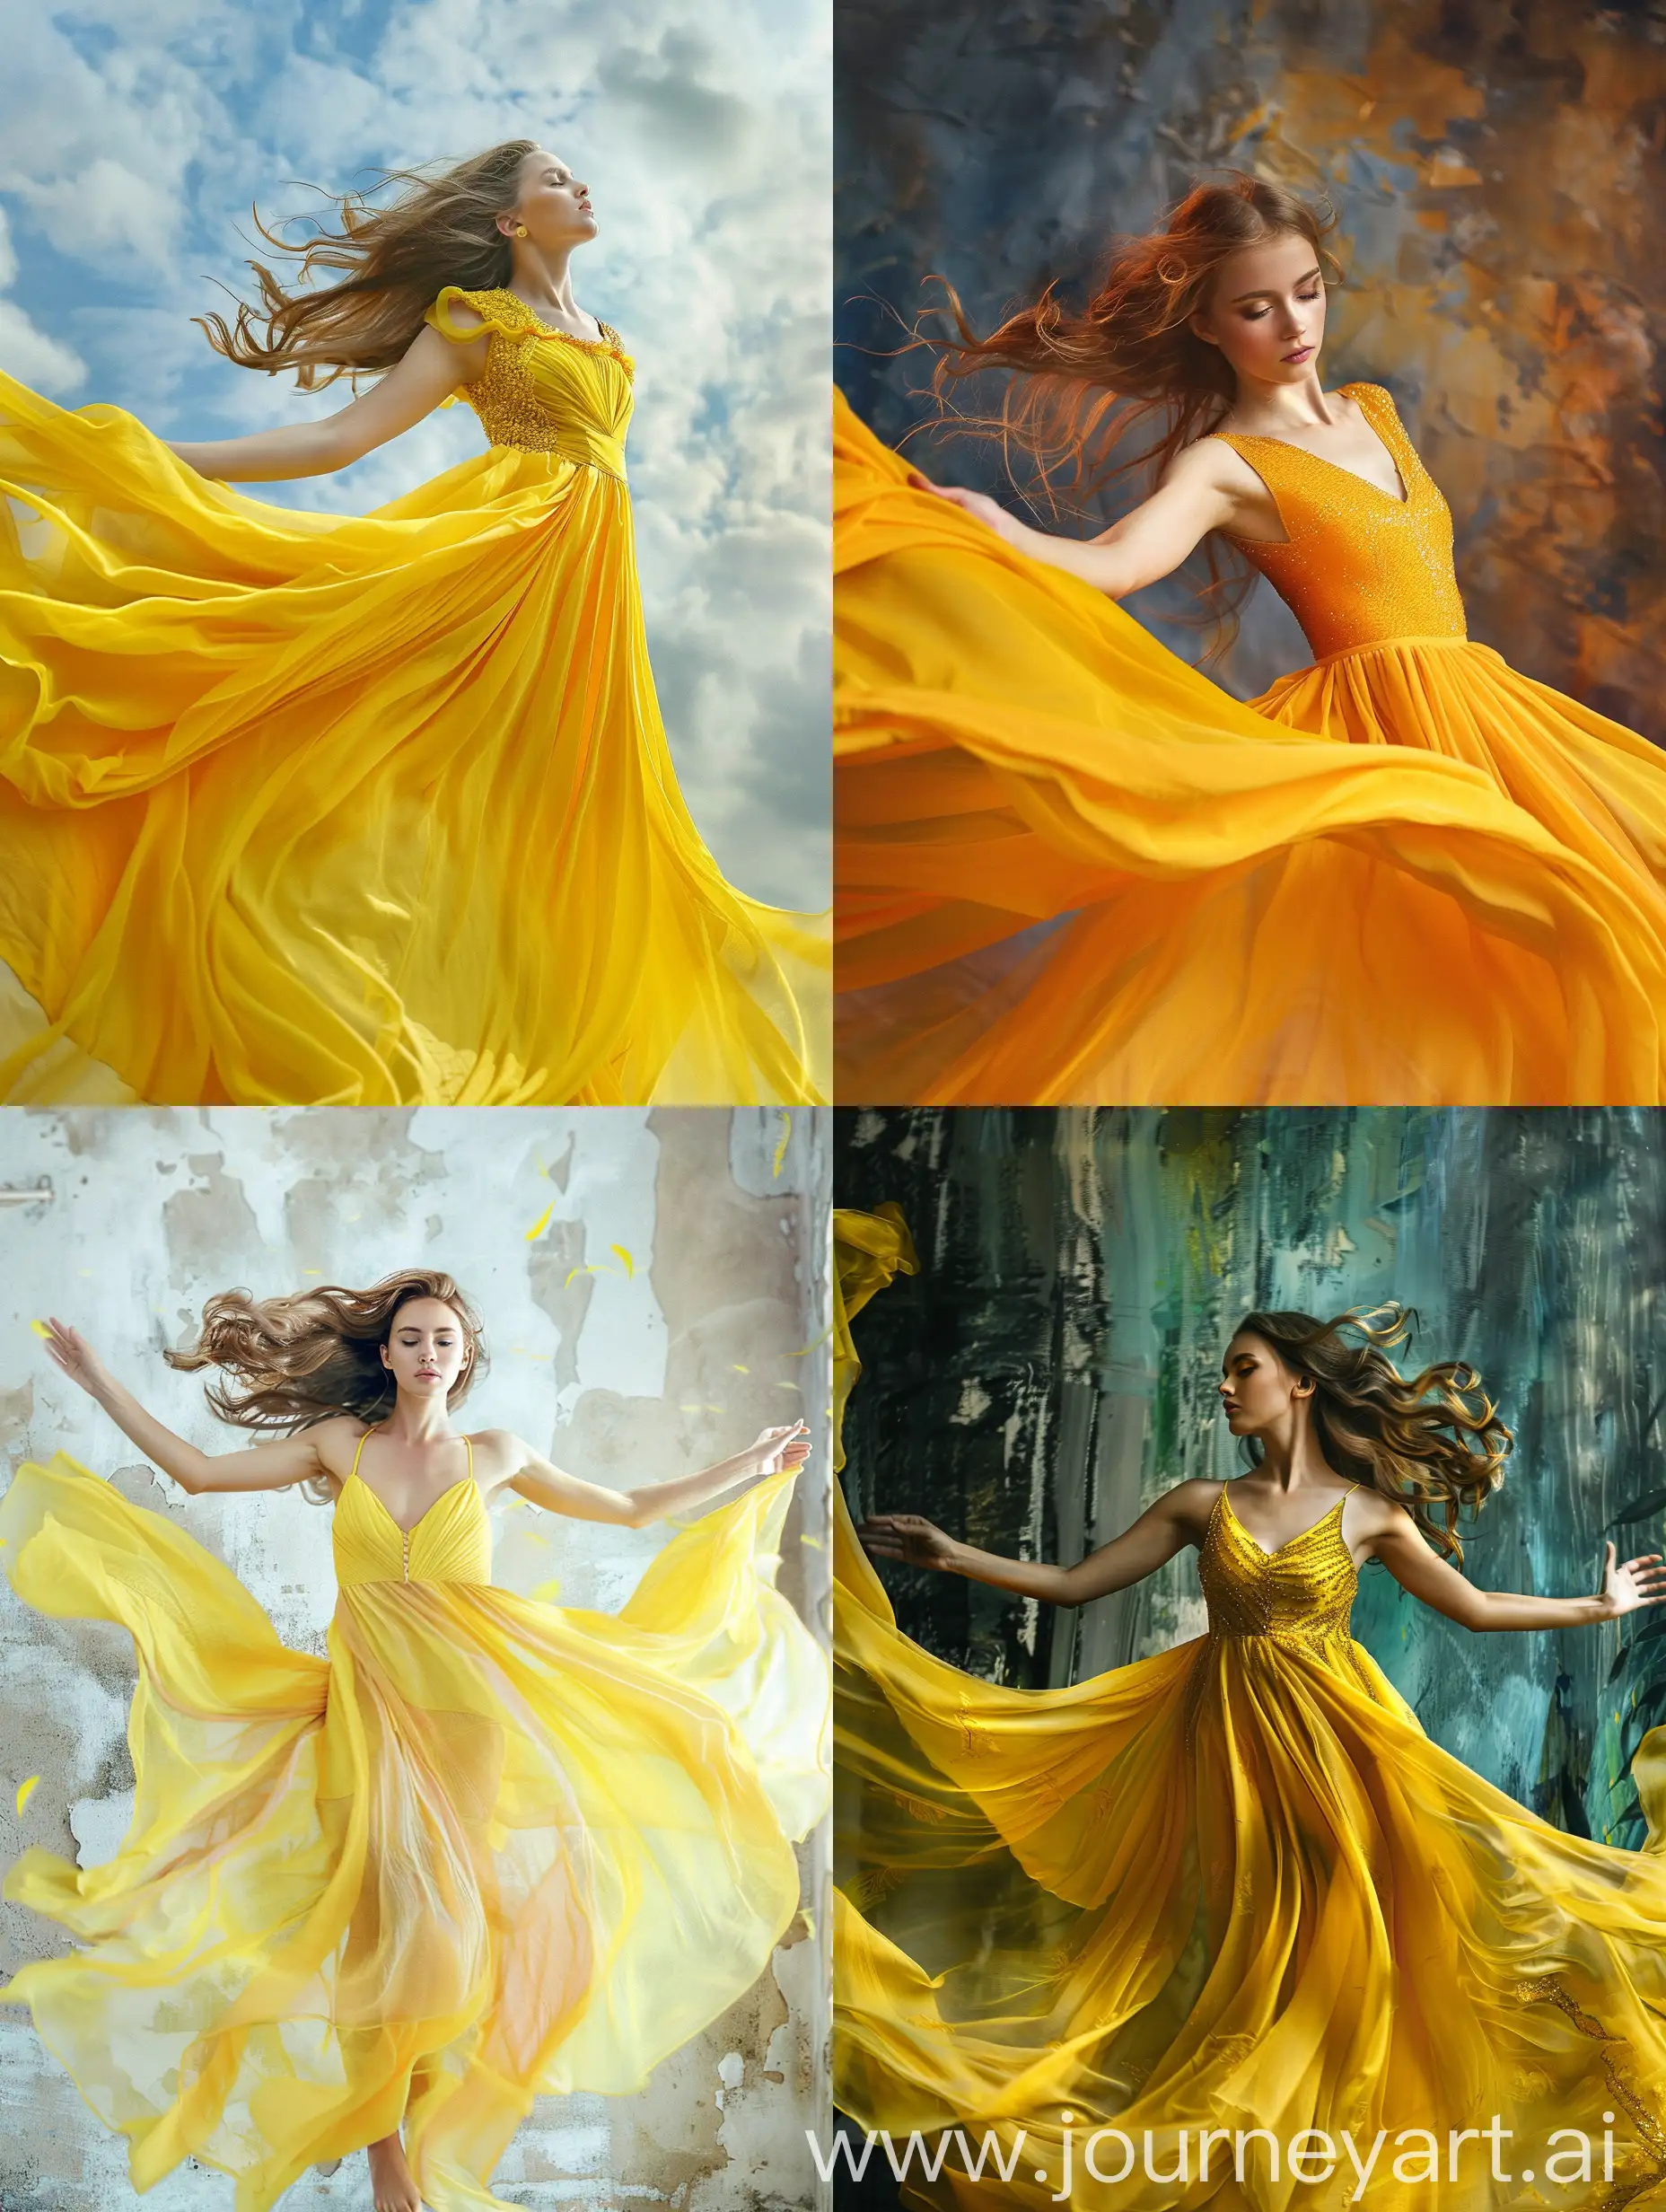 Woman Beauty Fashion Dress, Girl In Flying Yellow Fluttering Gown stock photo